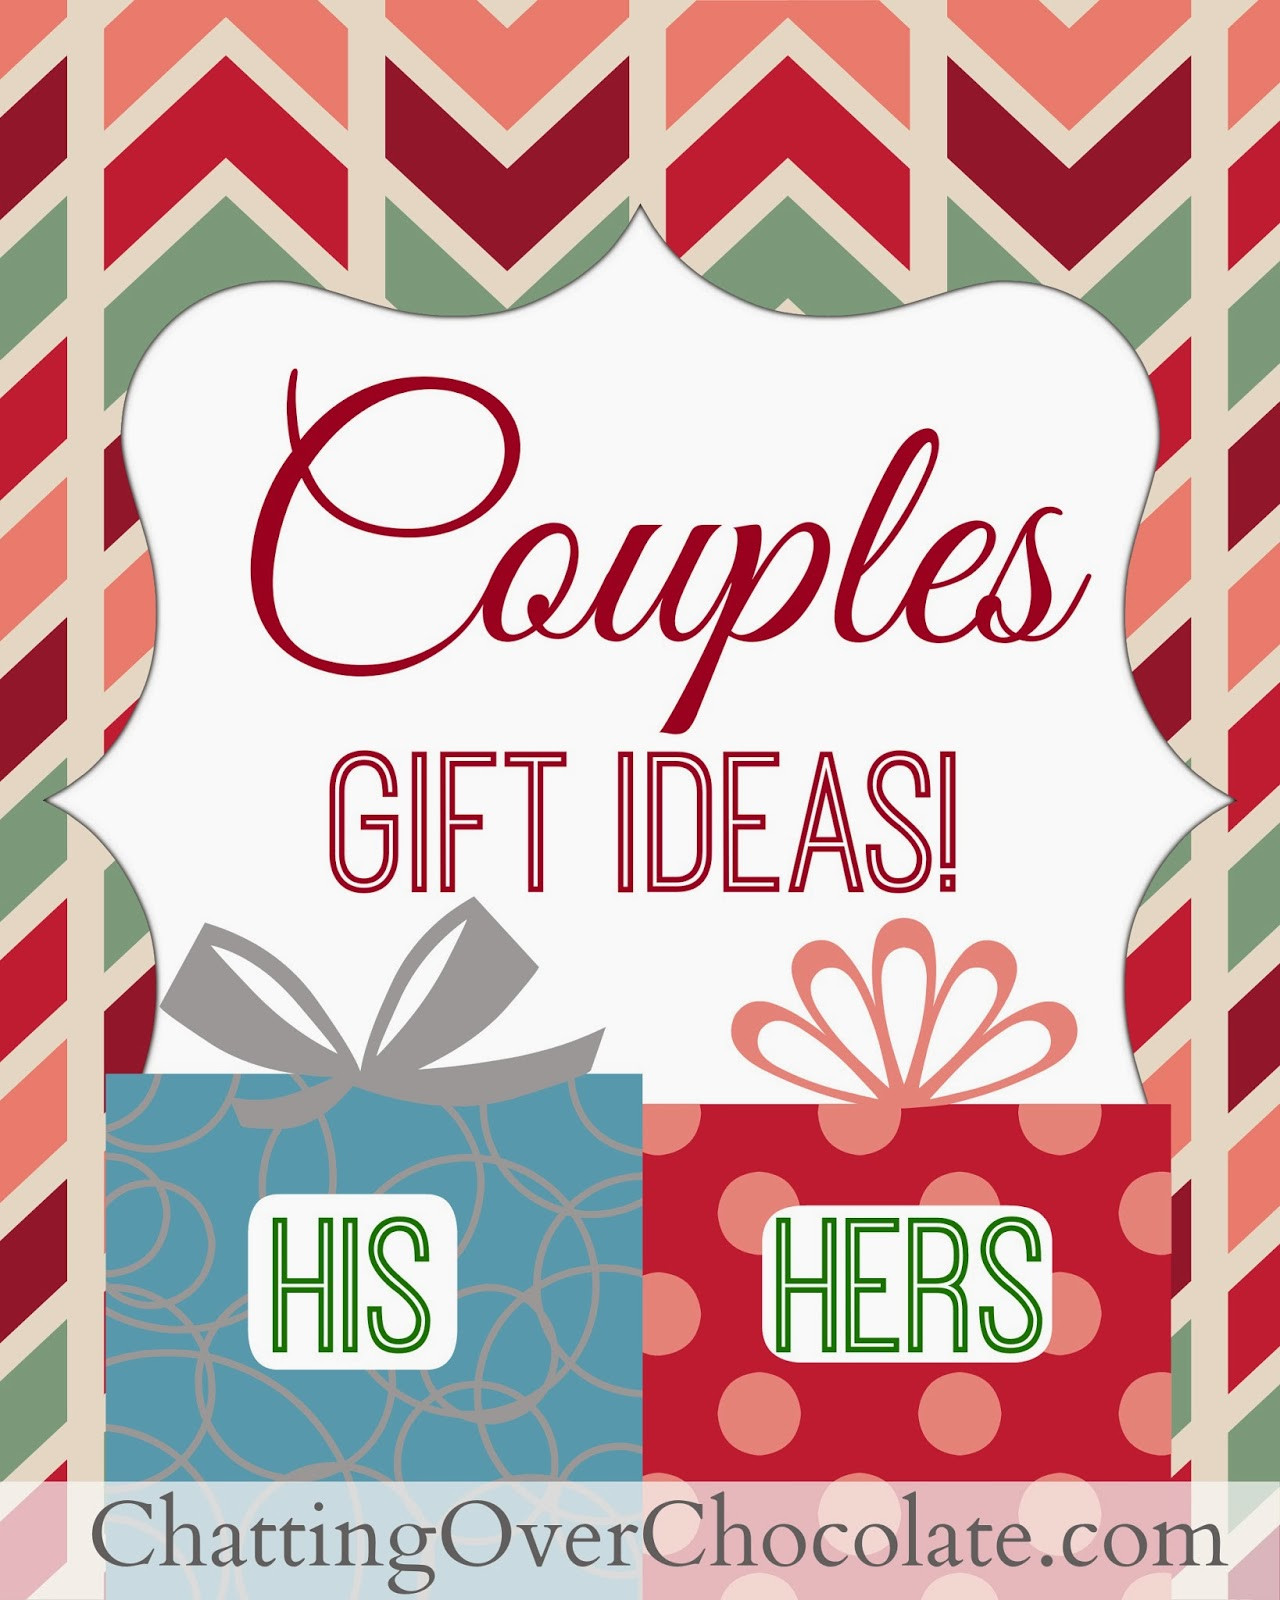 Couple Gift Ideas
 Chatting Over Chocolate His & Hers Gift Ideas Couples